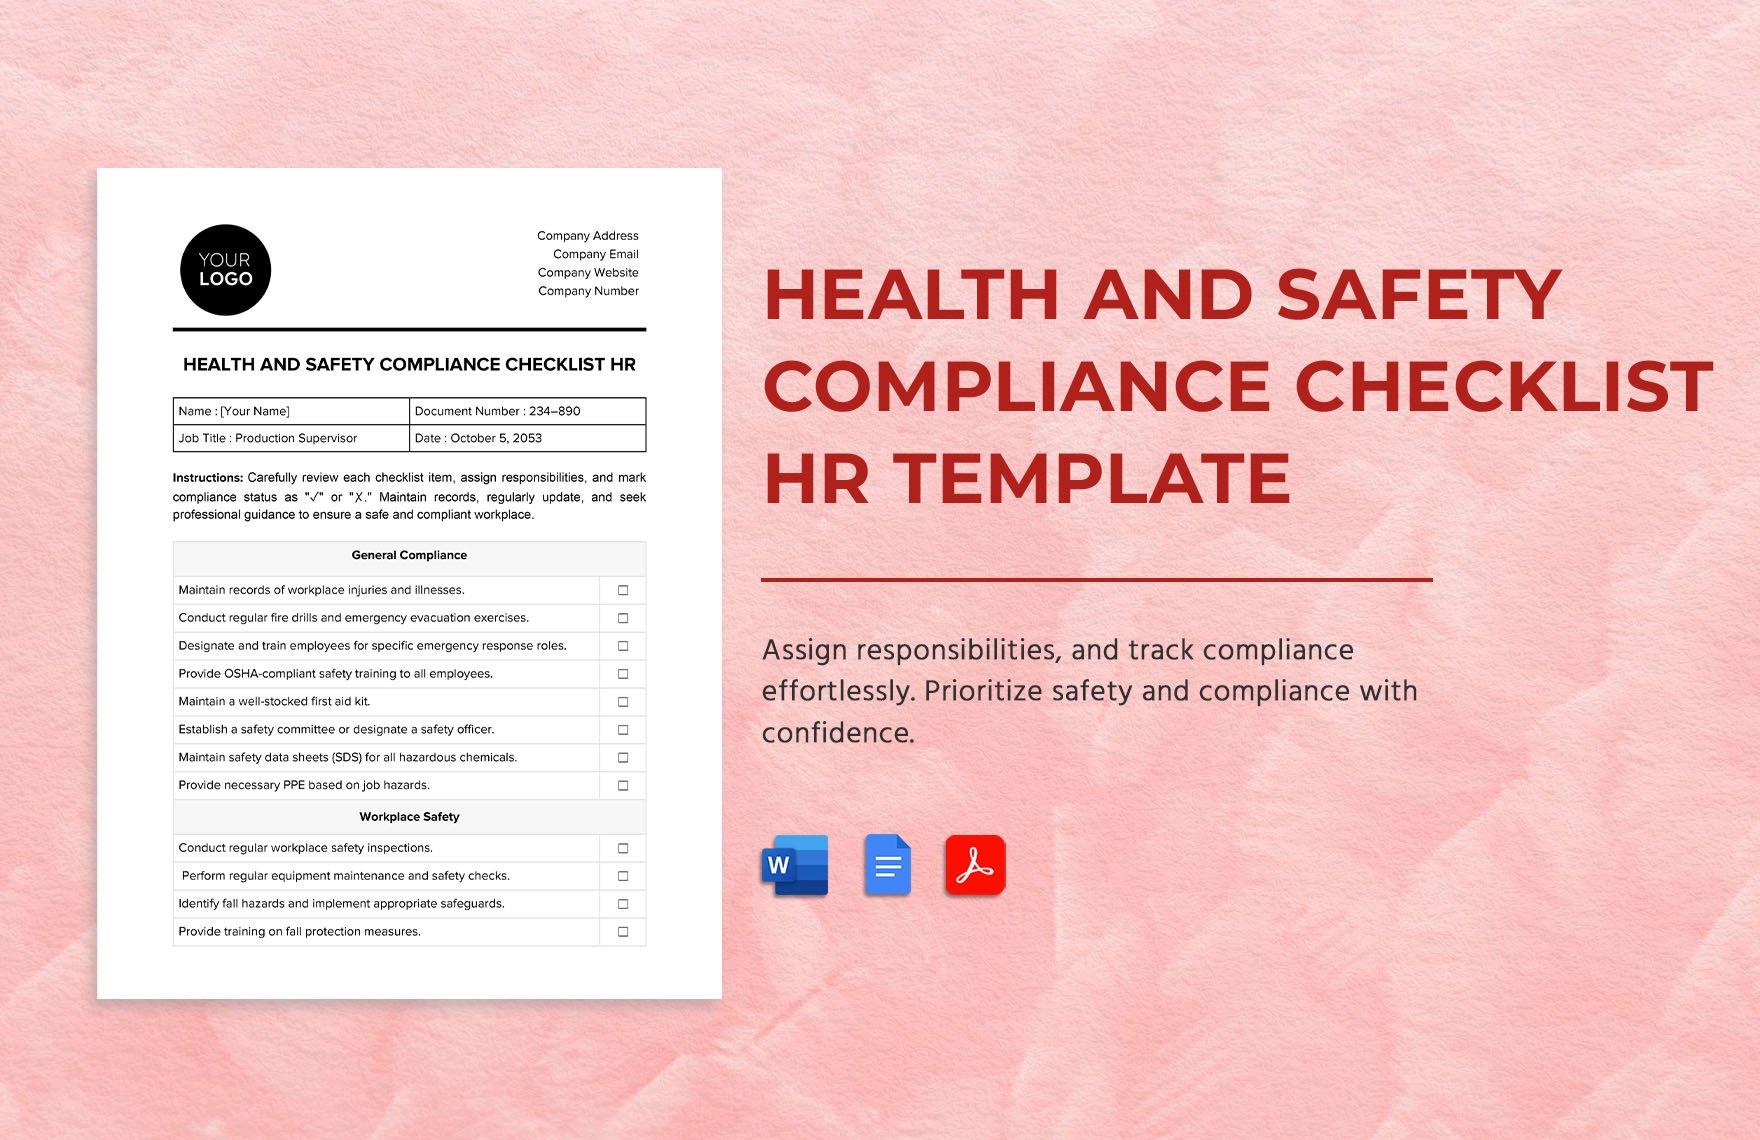 Health and Safety Compliance Checklist HR Template